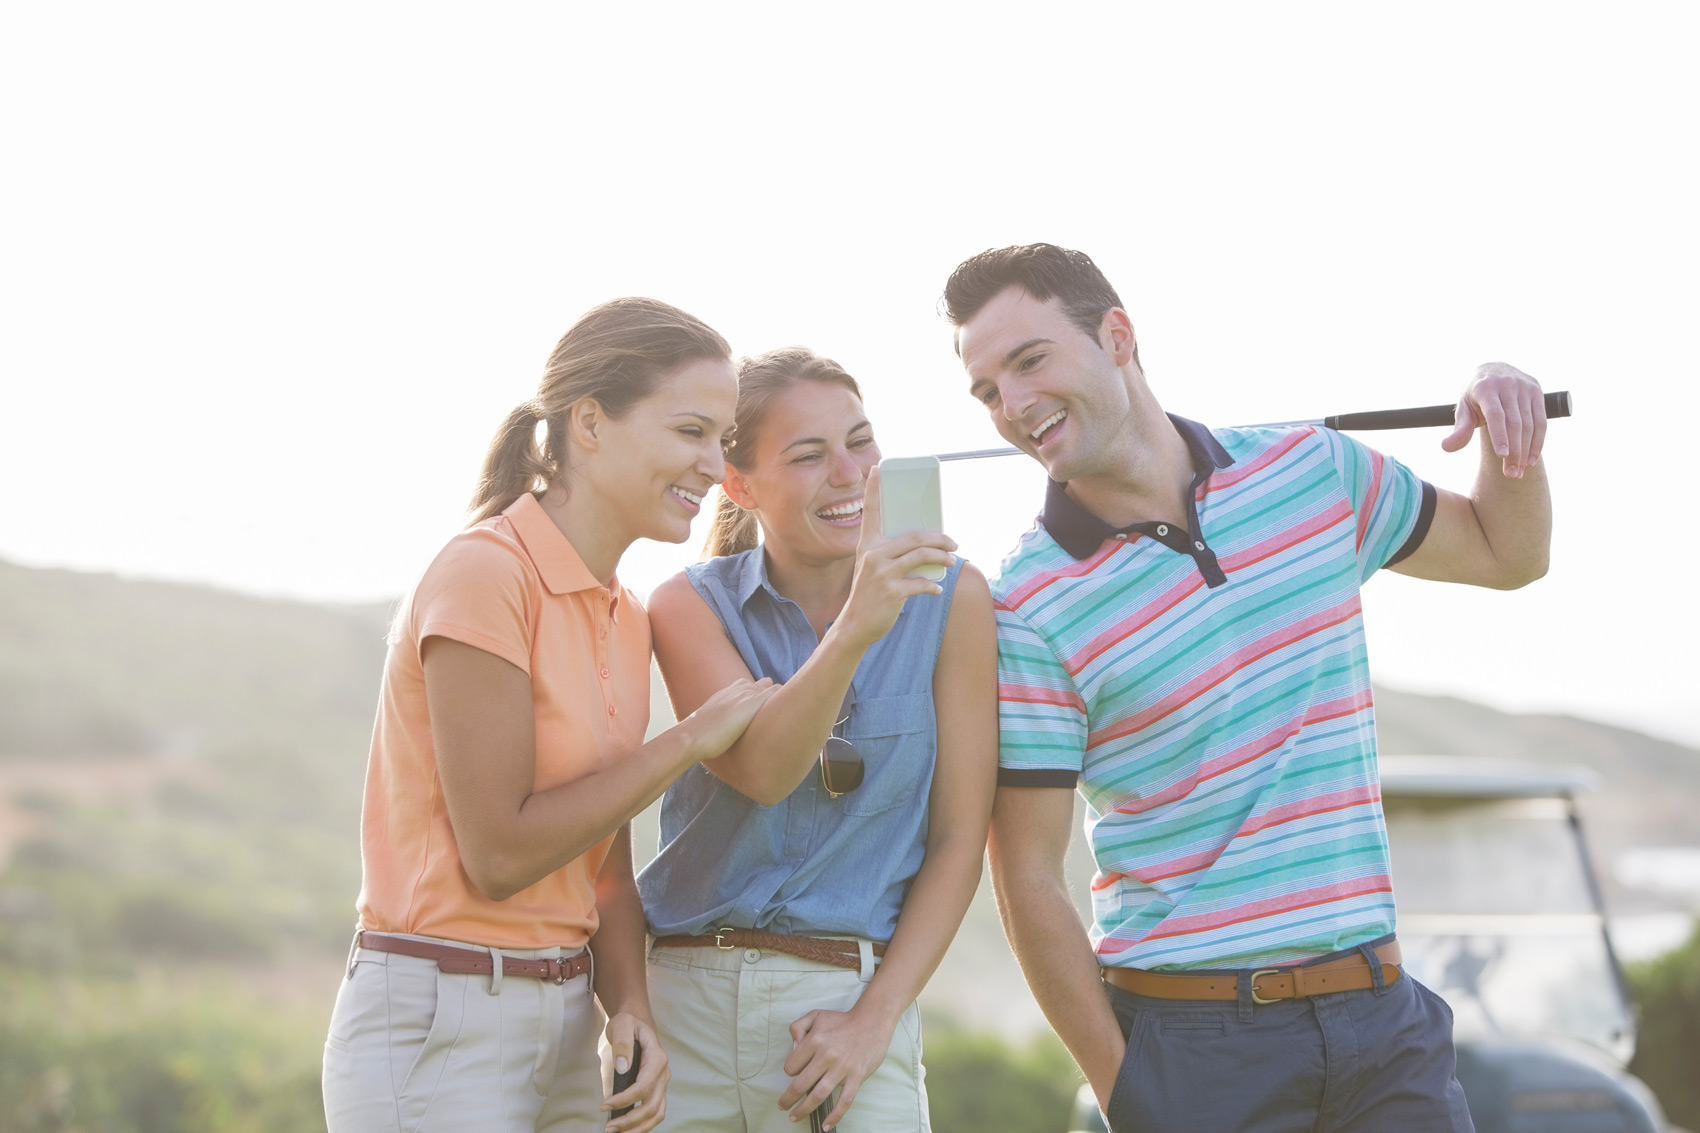 Members at Golf Club - How to Boost Member Engagement for Clubs